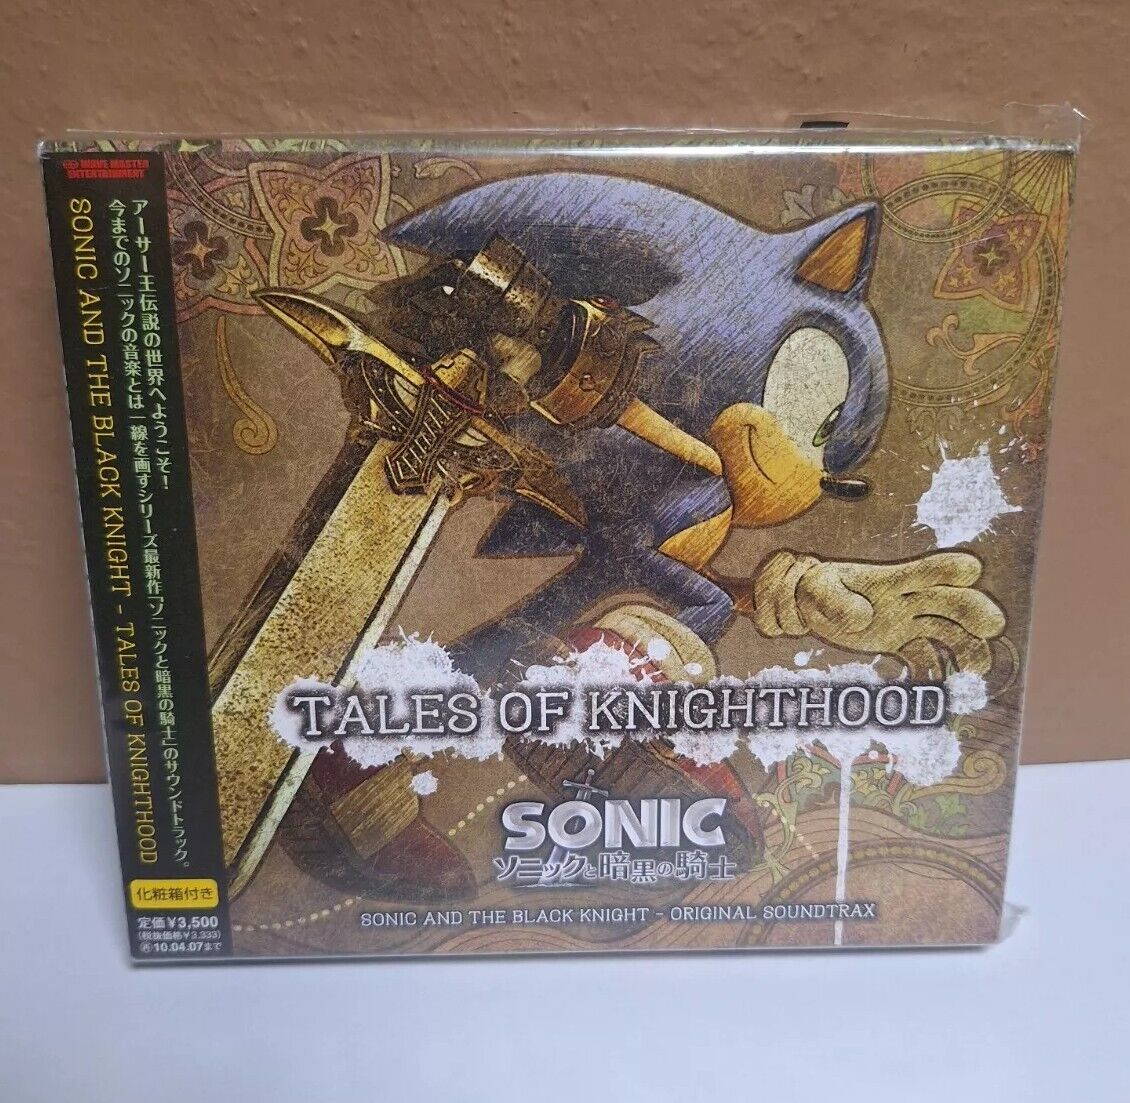 TRULY RARE SAMPLE VERSION SONIC THE HEDGEHOG Soundtrack TALES OF KNIGHTHOOD READ